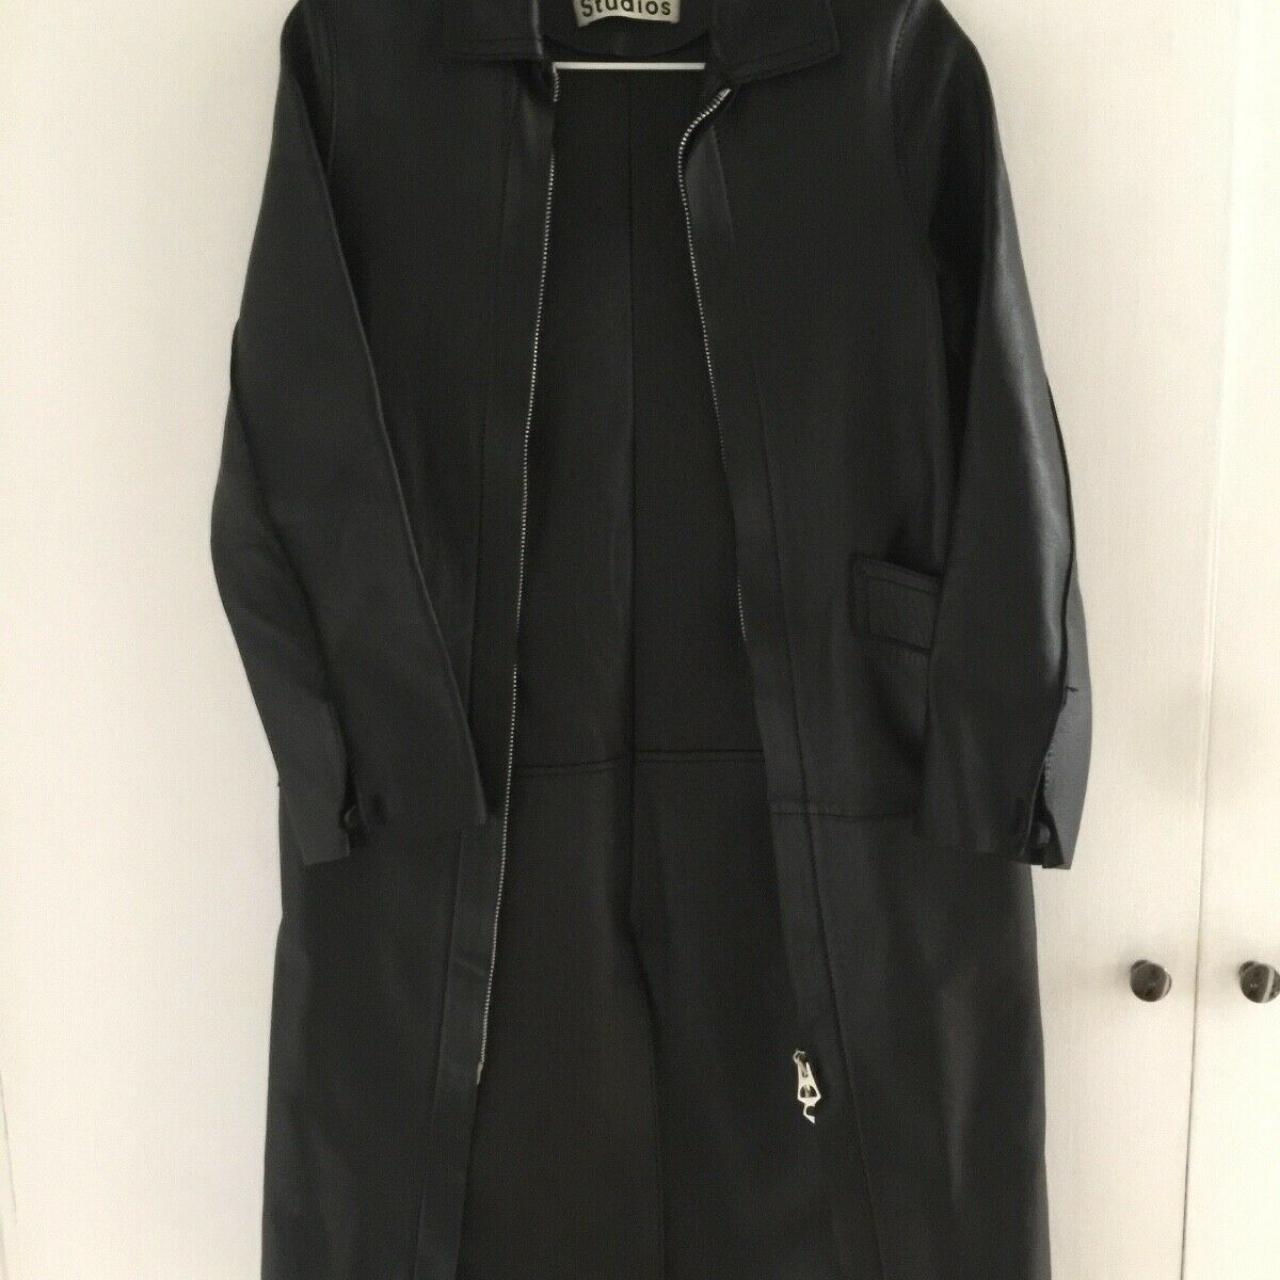 Long black & buttery soft leather coat from Acne - Depop